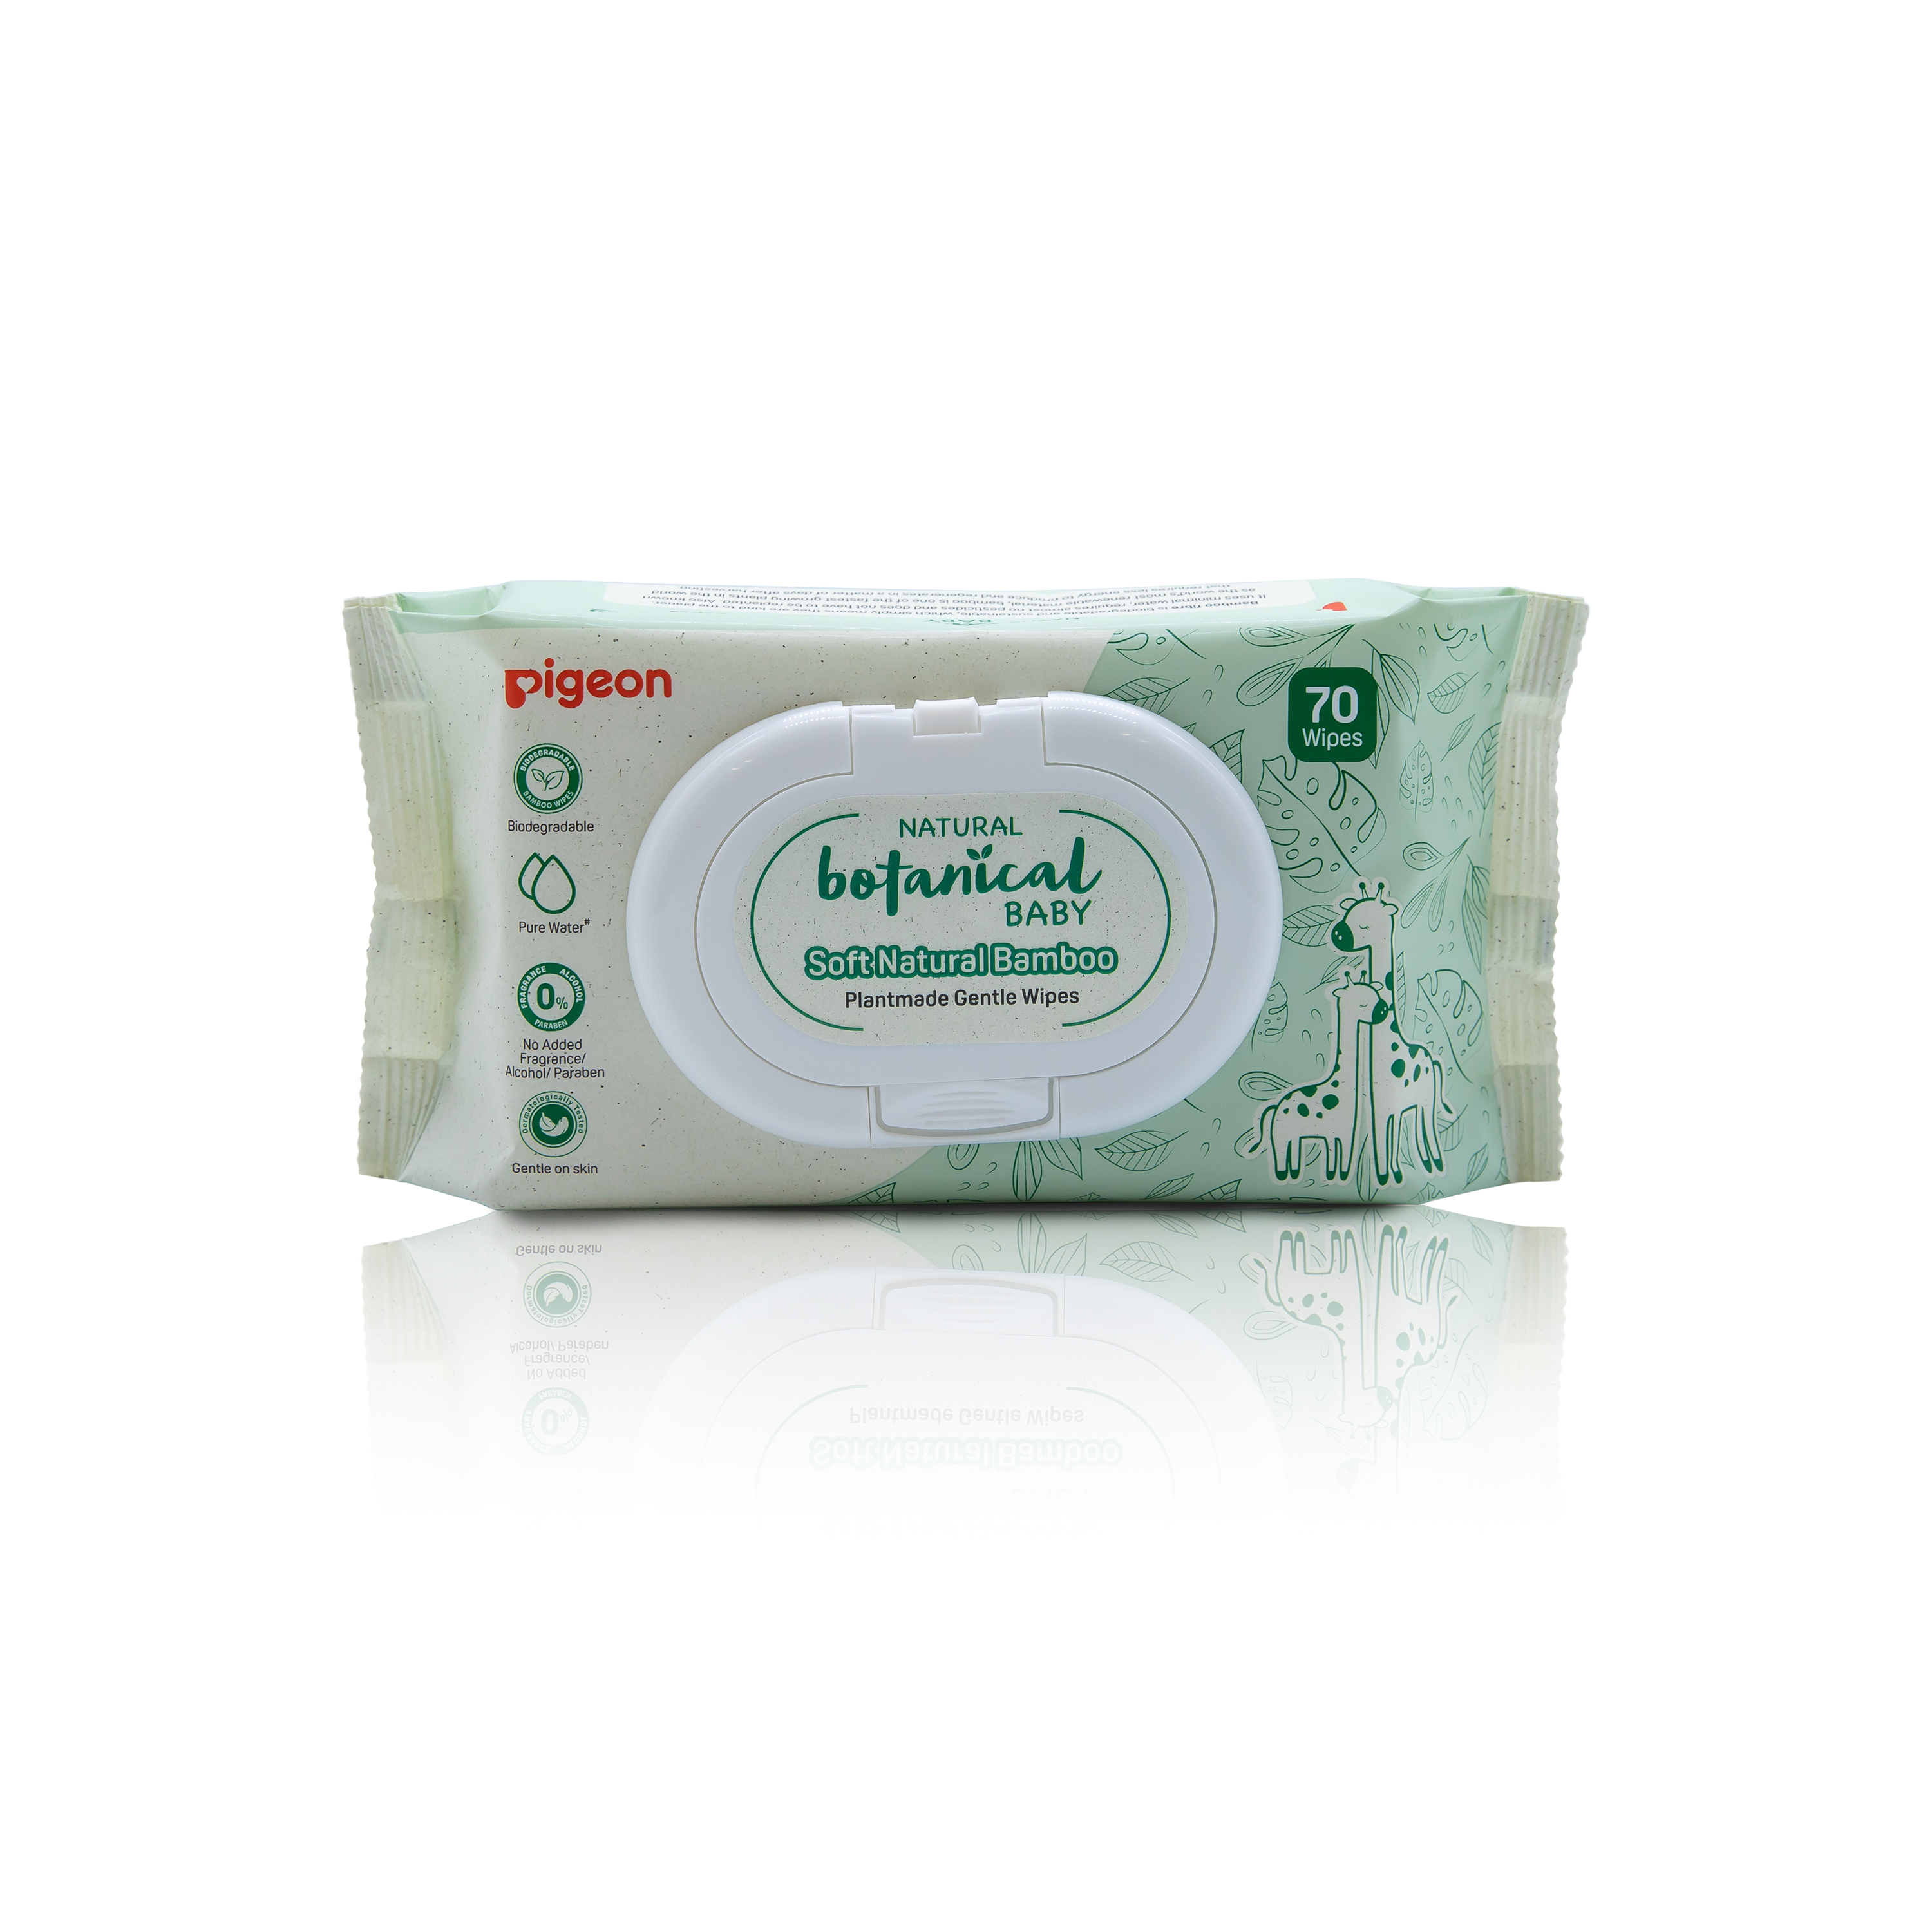 Pigeon Natural Botanical Baby Plantmade Gentle Wipes (PG-79419)